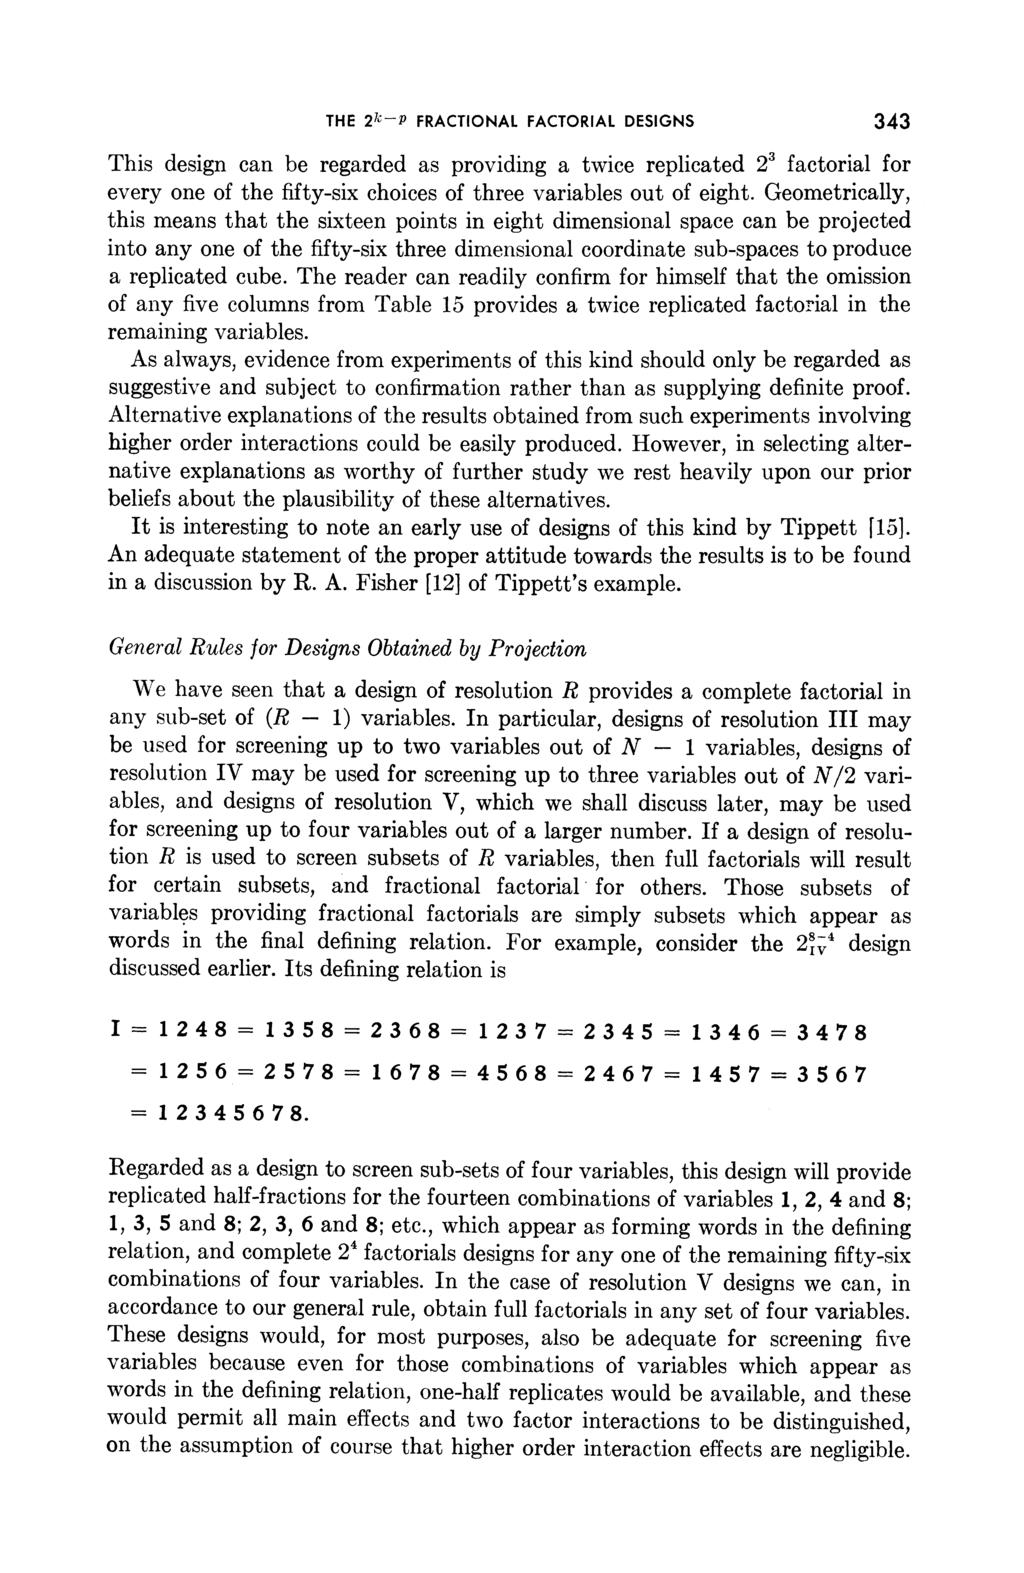 THE 2k-P FRACTIONAL FACTORIAL DESIGNS 343 This design can be regarded as providing a twice replicated 23 factorial for every one of the fifty-six choices of three variables out of eight.